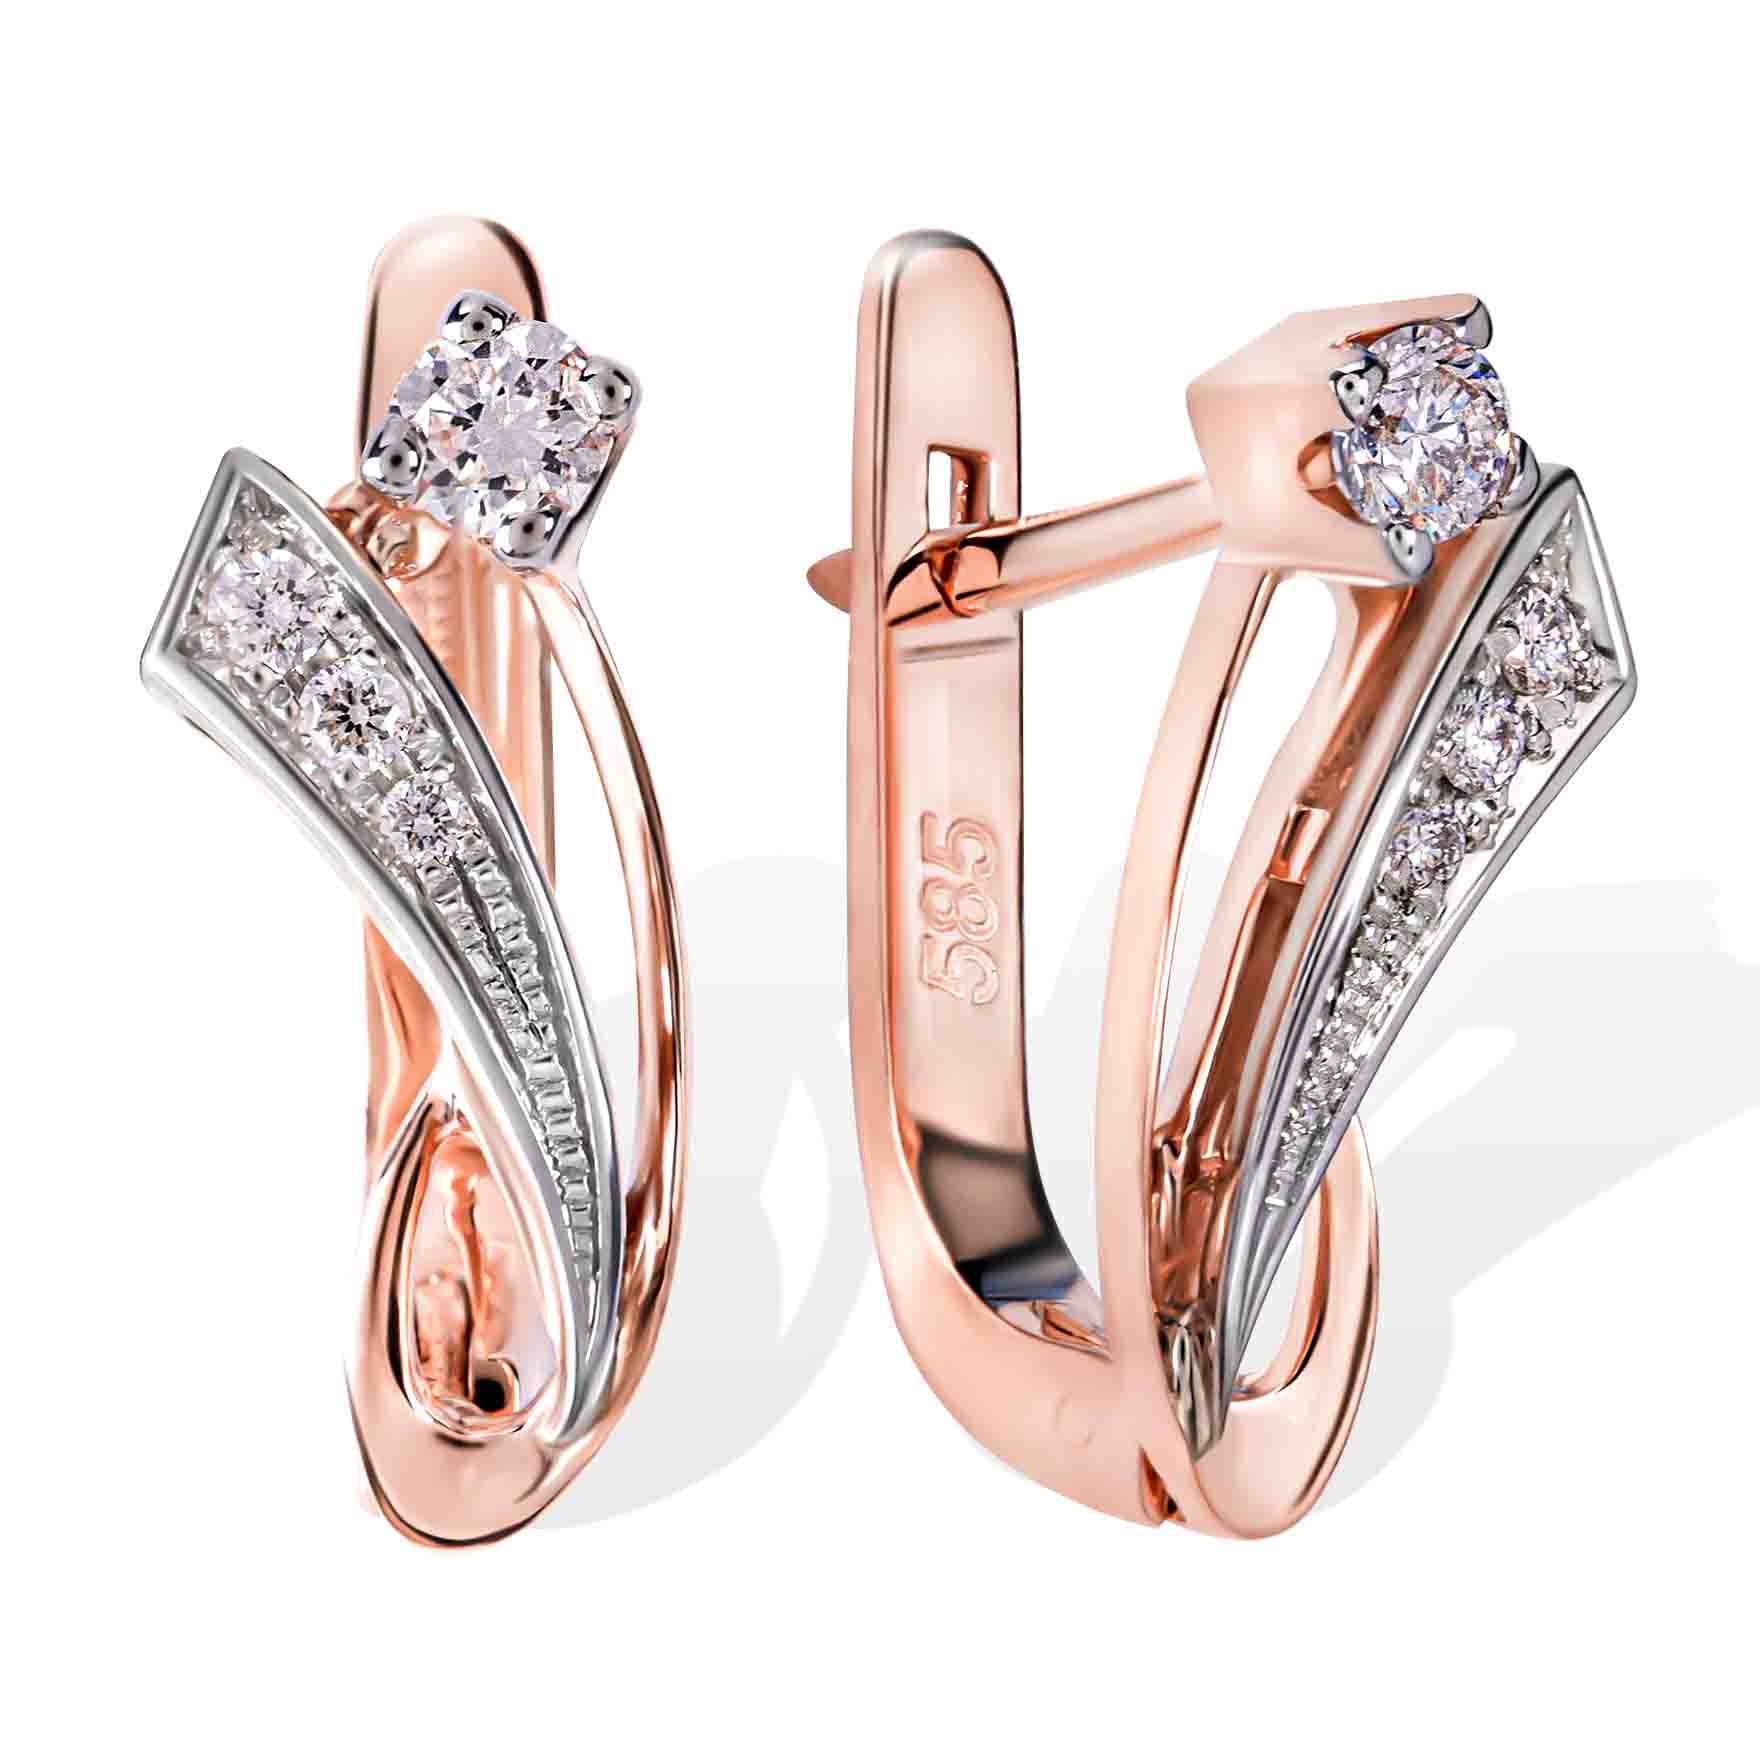 Diamond Leverback Earrings with Nostalgic Motif. Tested 585 (14K) Rose and  White Gold